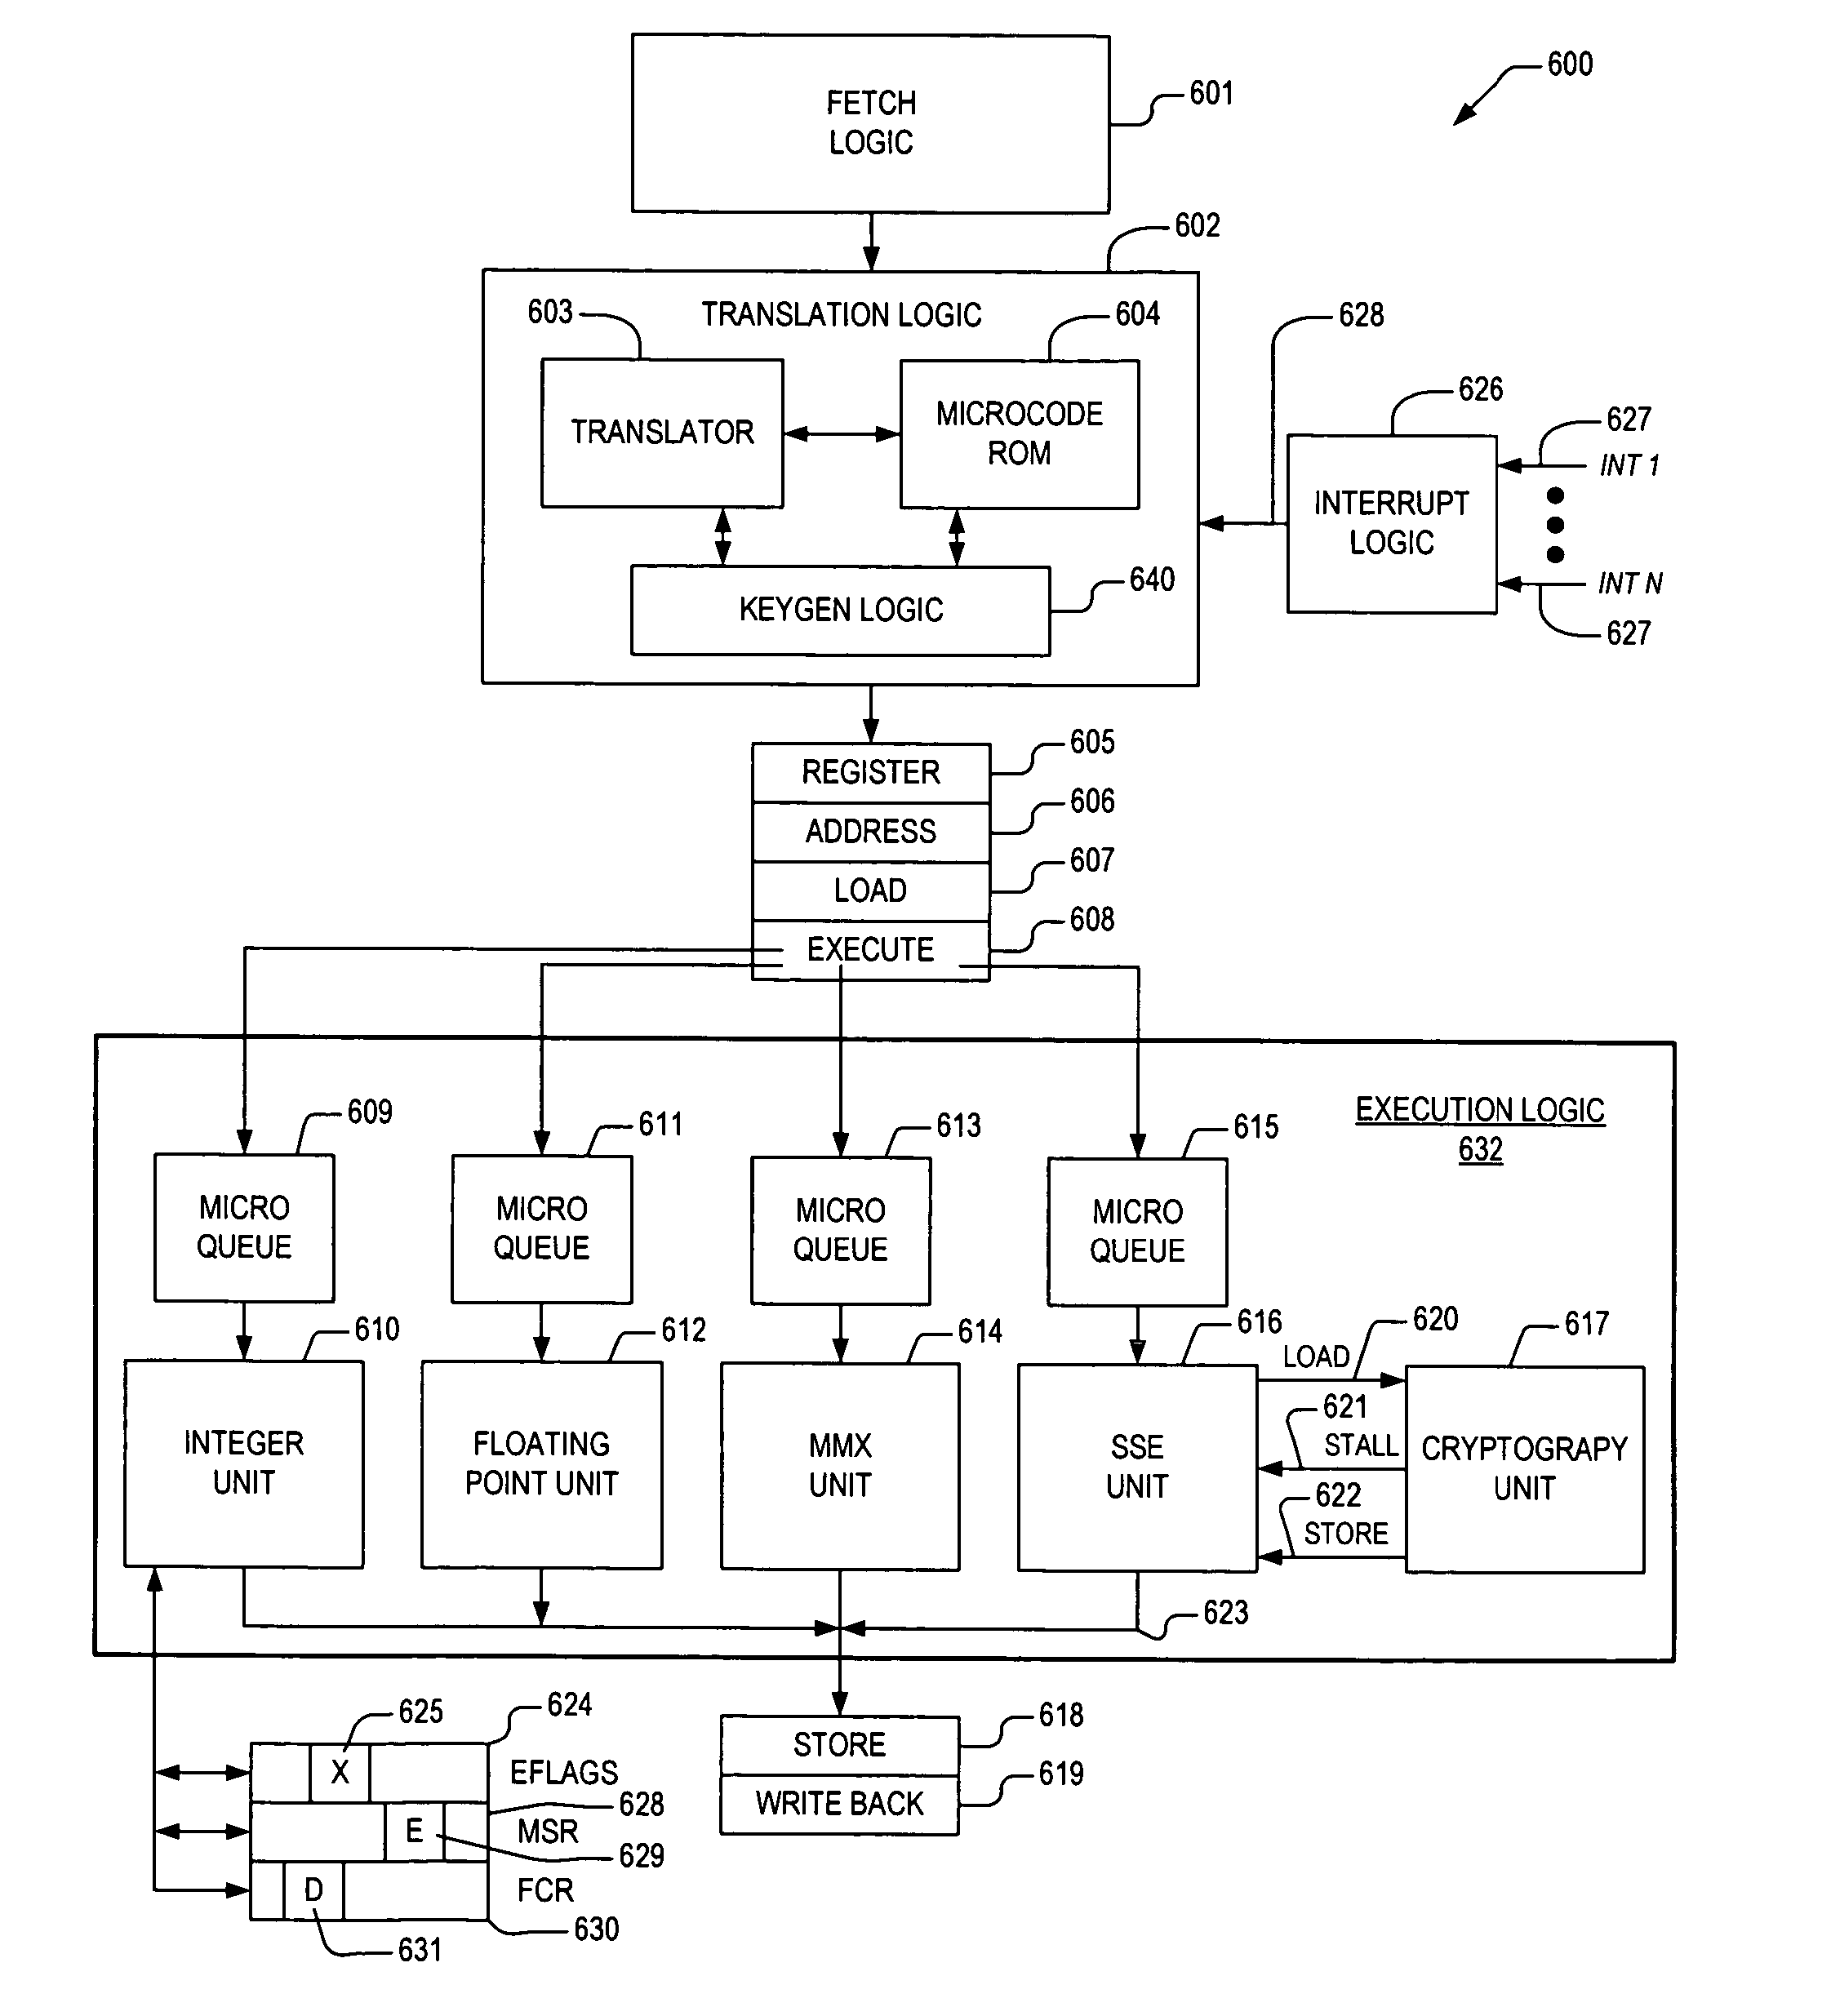 Apparatus and method for providing user-generated key schedule in a microprocessor cryptographic engine